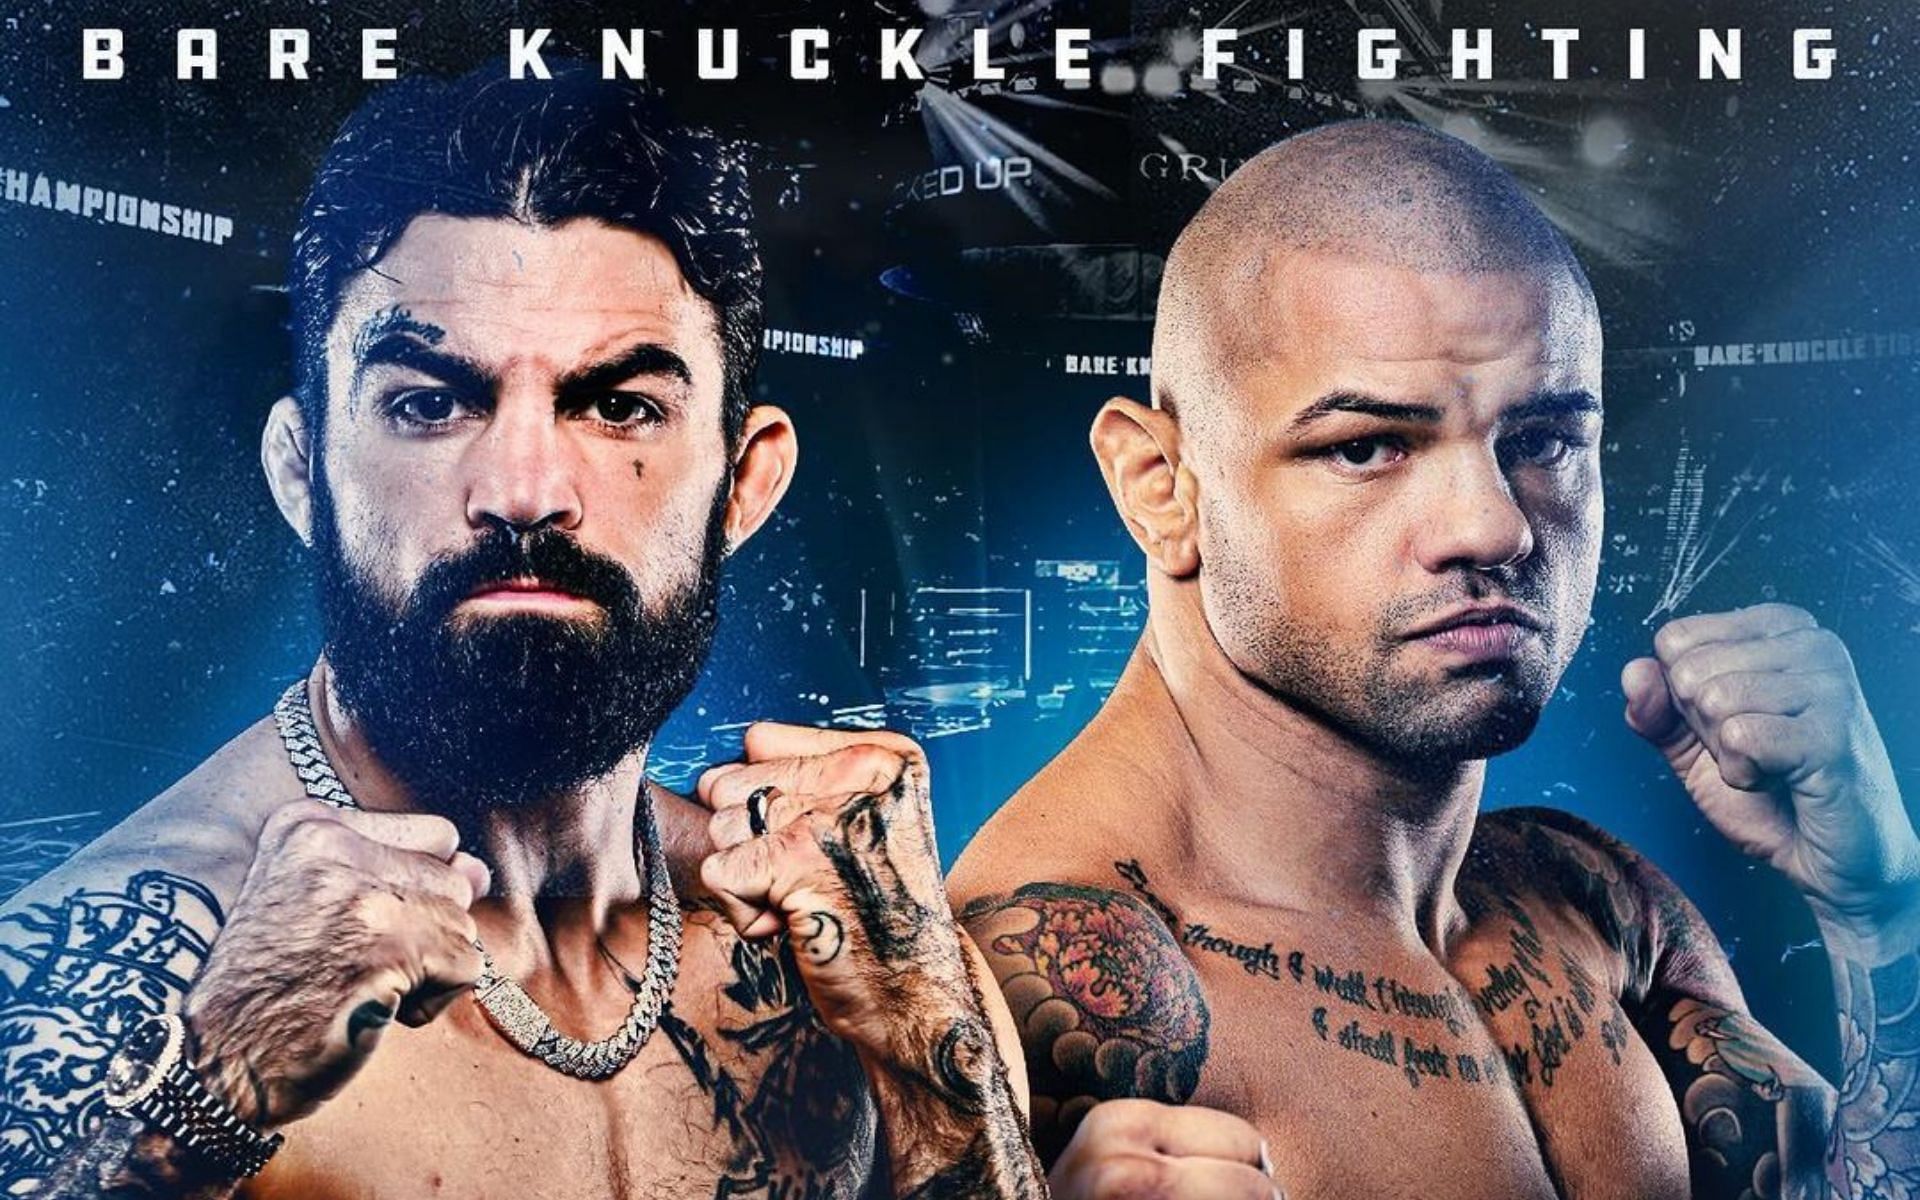 Mike Perry (left) will face Thiago Alves (right) in the main event of BKFC: KnuckleMania IV [Image courtesy of @bareknuklefc on Instagram]]